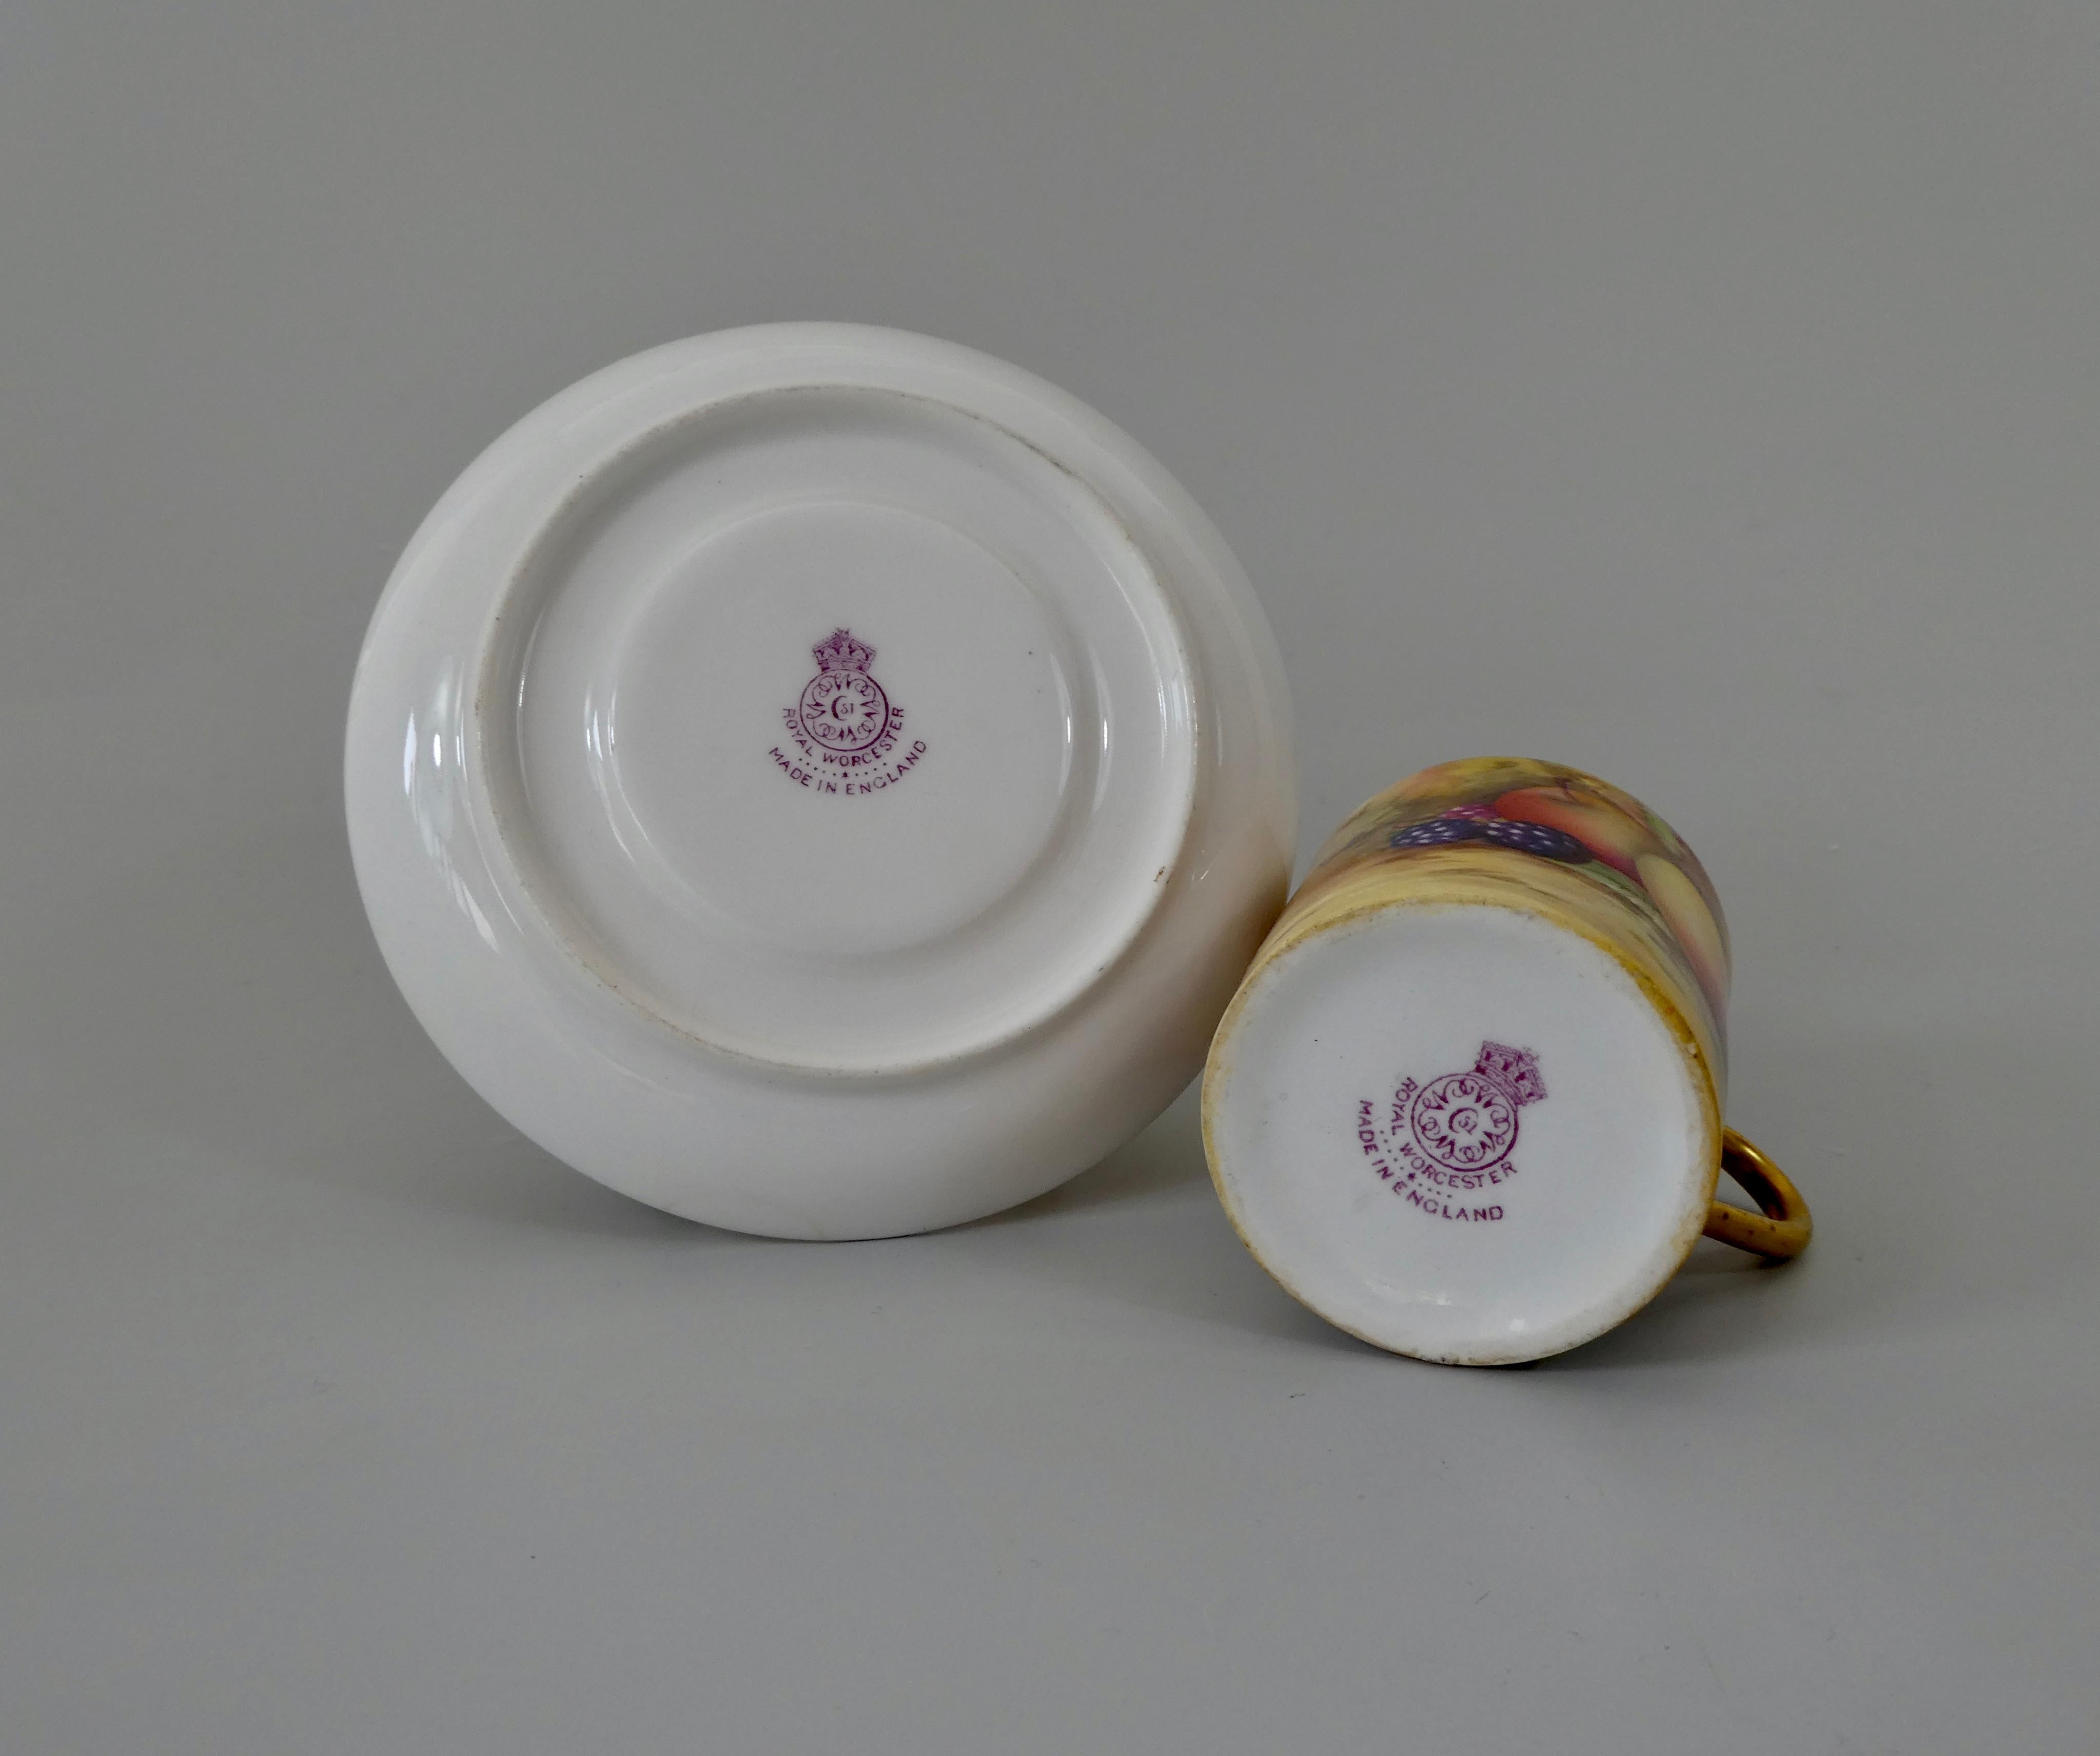 Early 20th Century Royal Worcester Porcelain Can and Saucer, Fruit Painted, Dated 1925